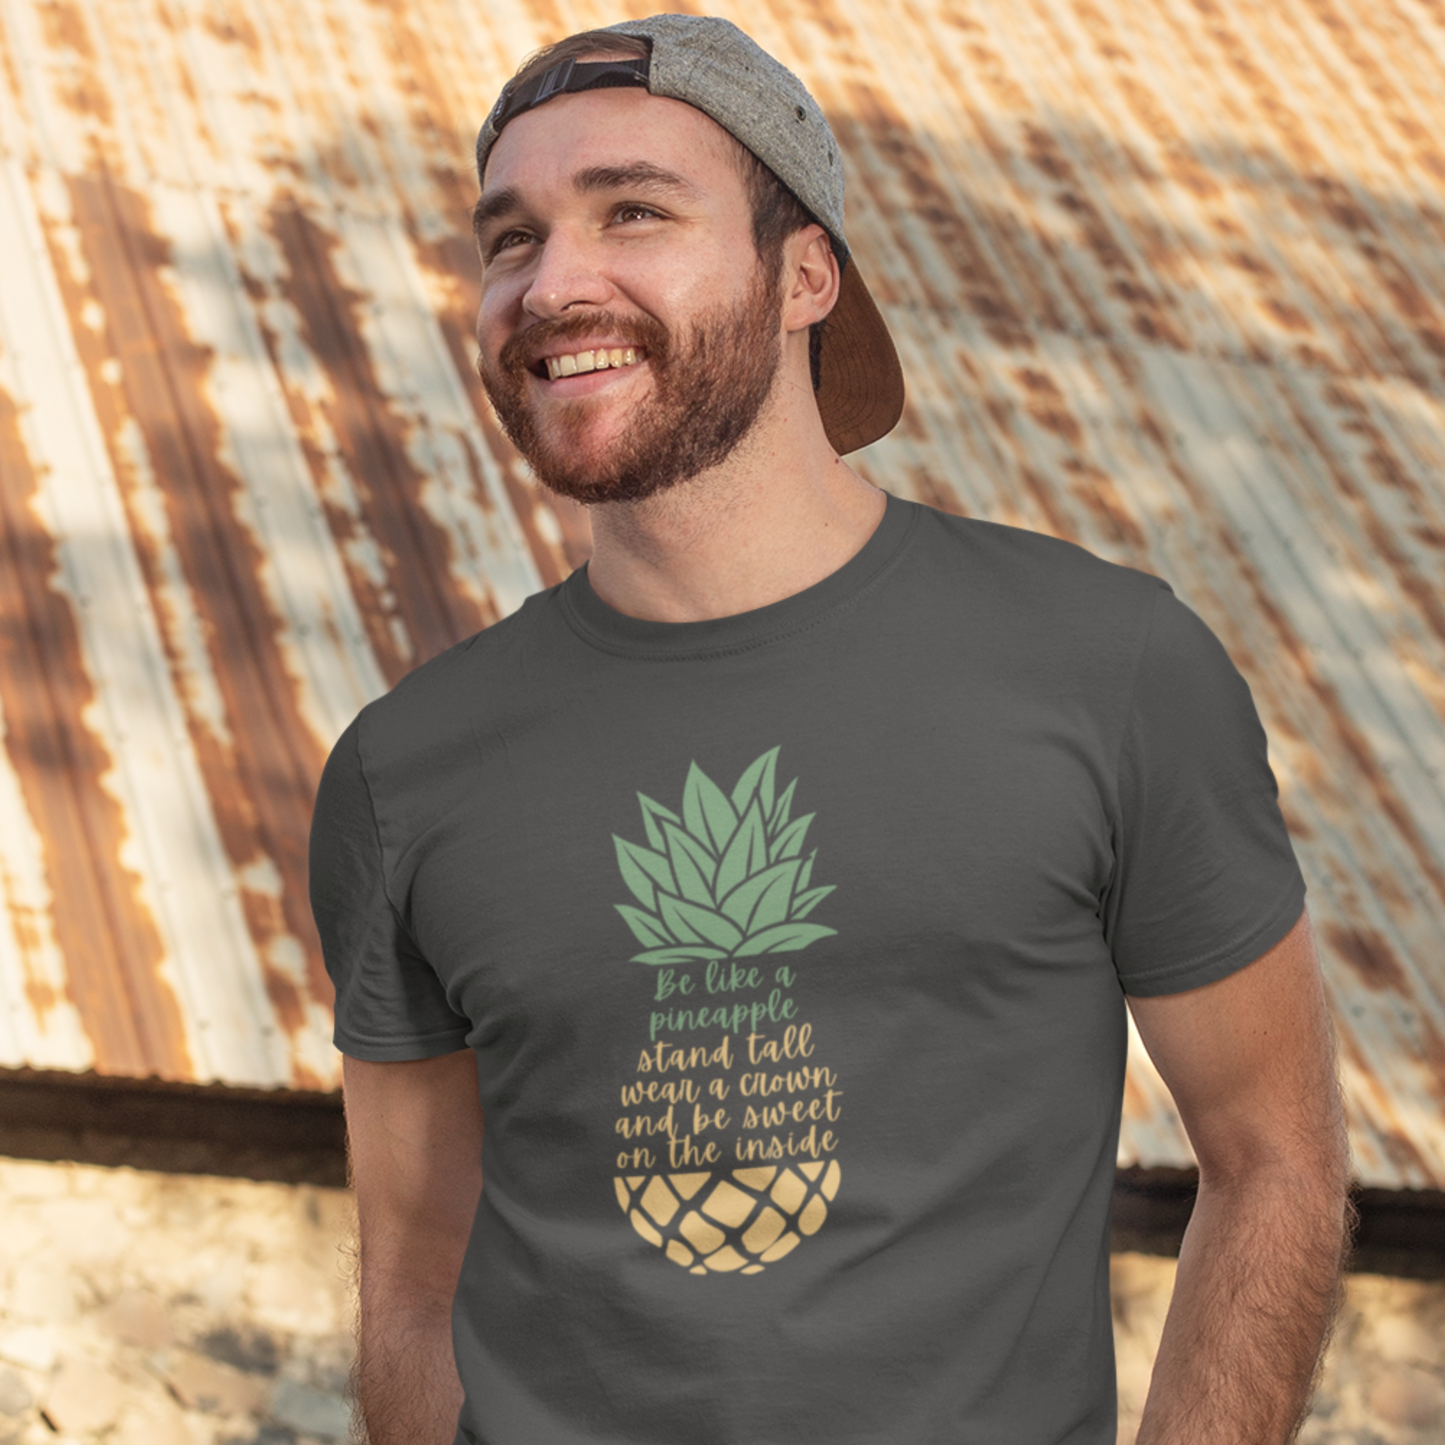 Unisex Softstyle T-Shirt, Be Like a Pineapple